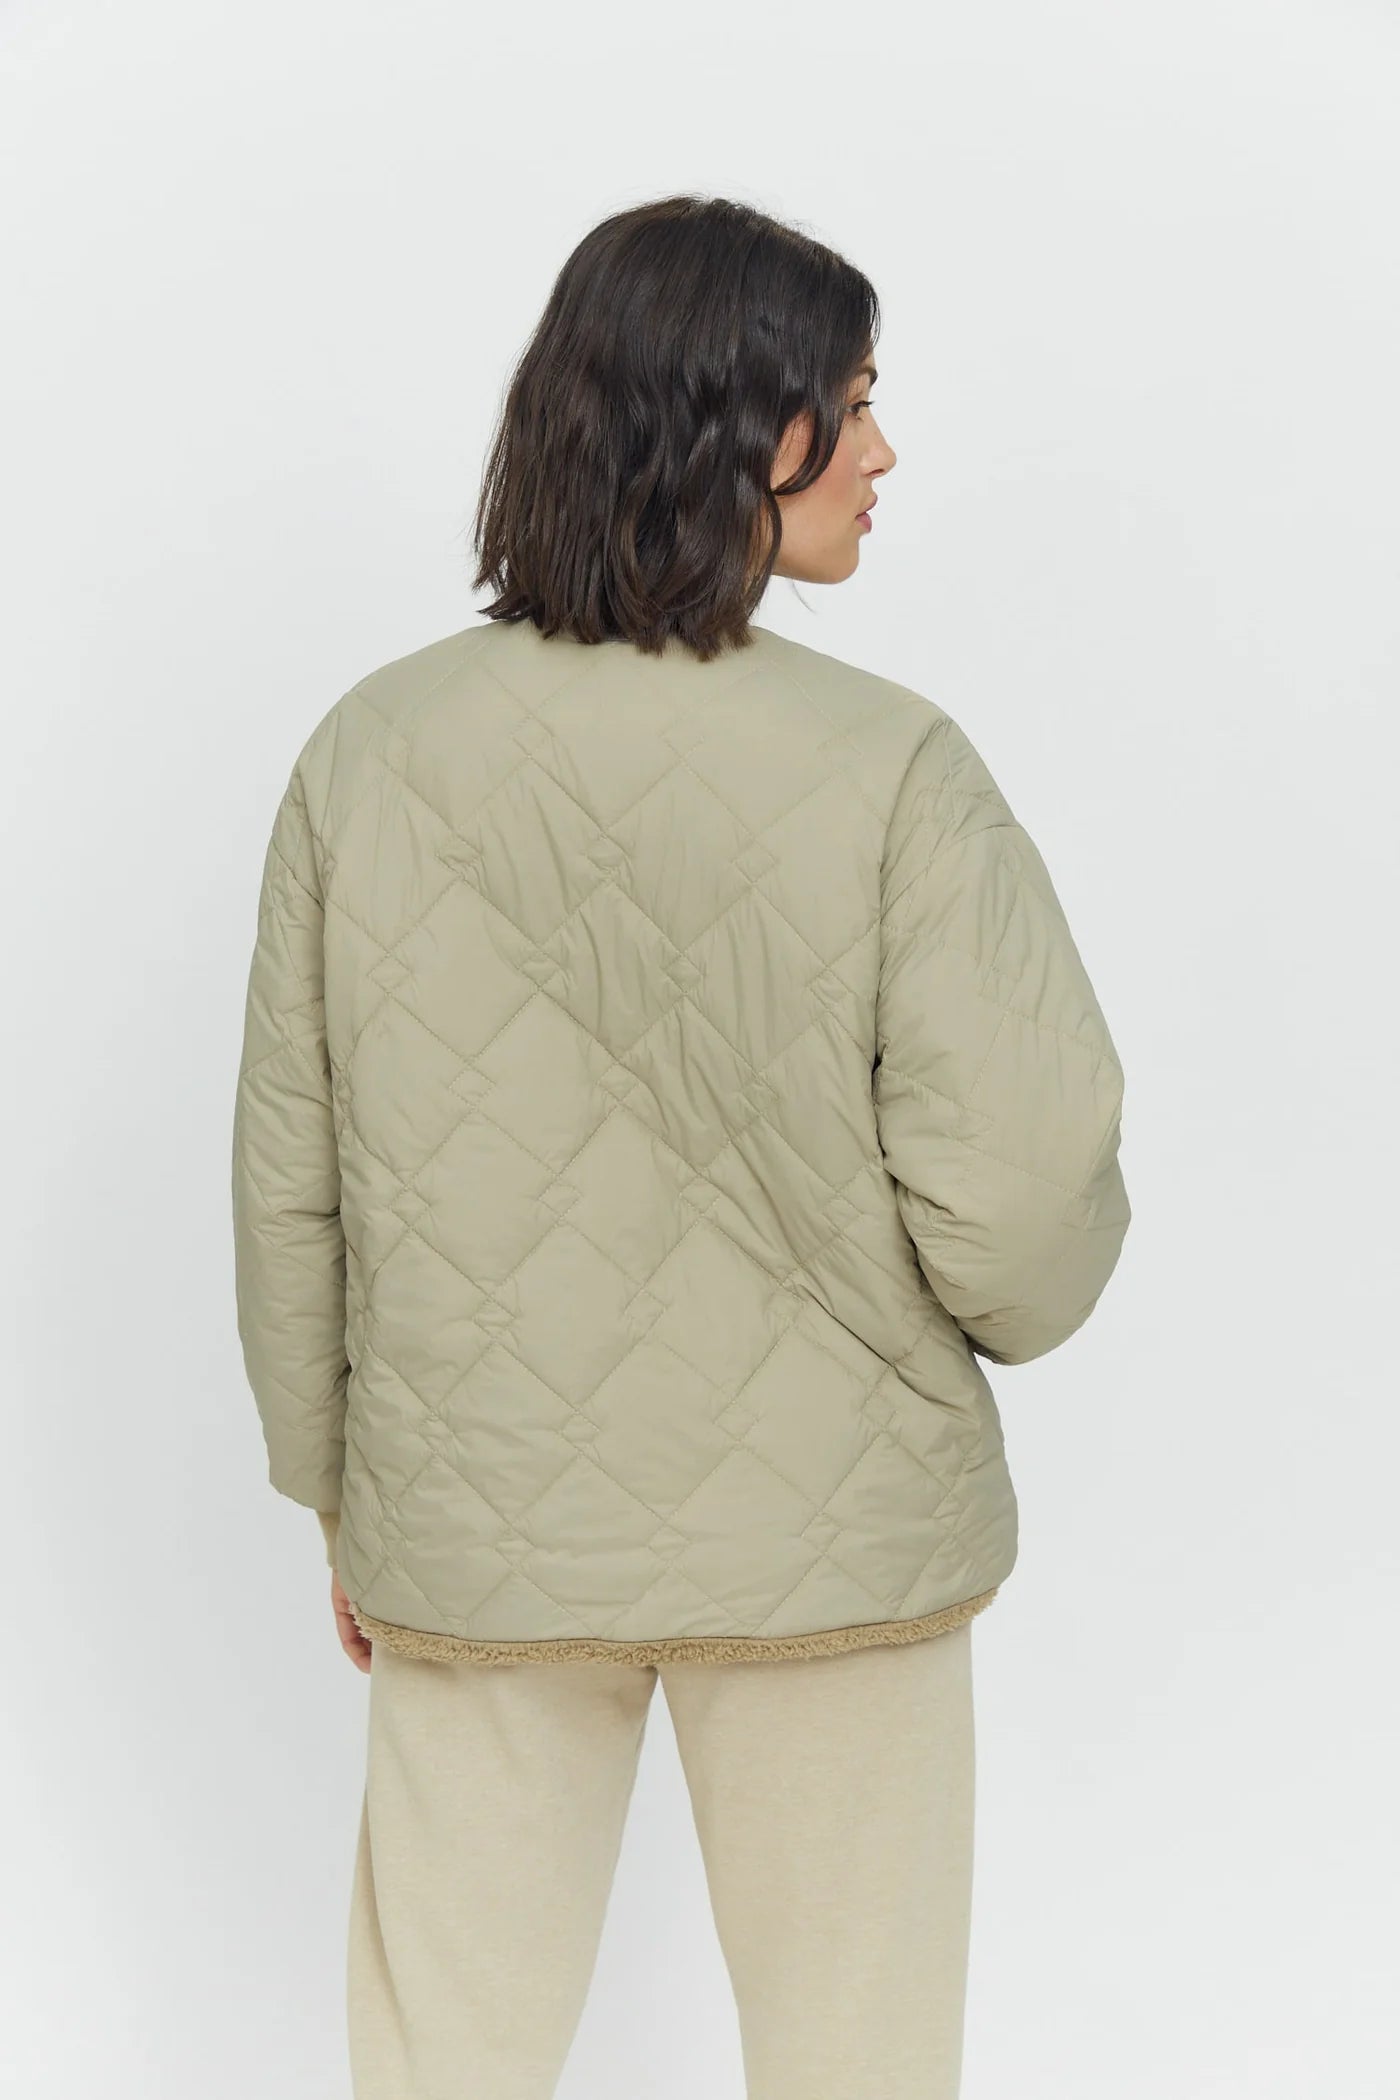 CLAY REVERSIBLE TEDDY JACKET | SANDY OLIVE